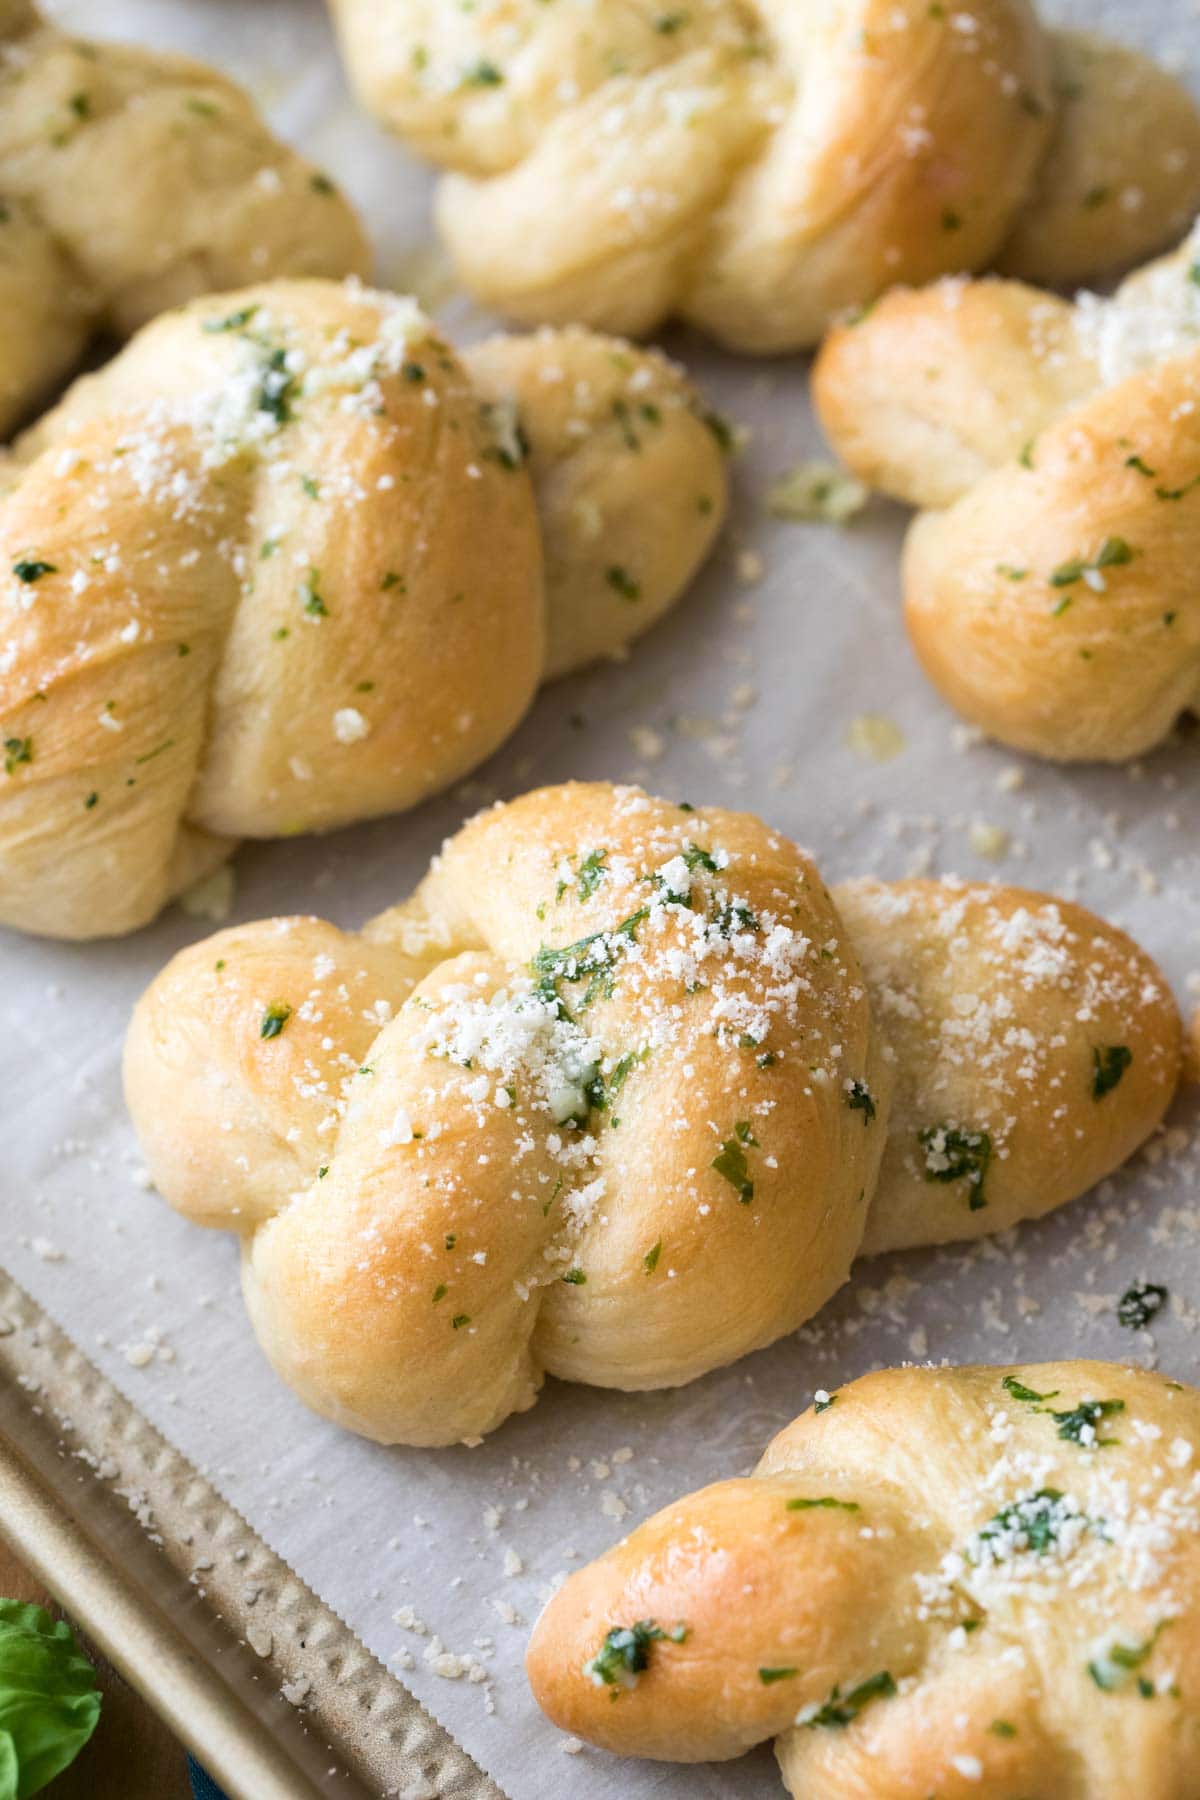 Homemade garlic knots topped with chopped fresh basil and grated parmesan after baking.